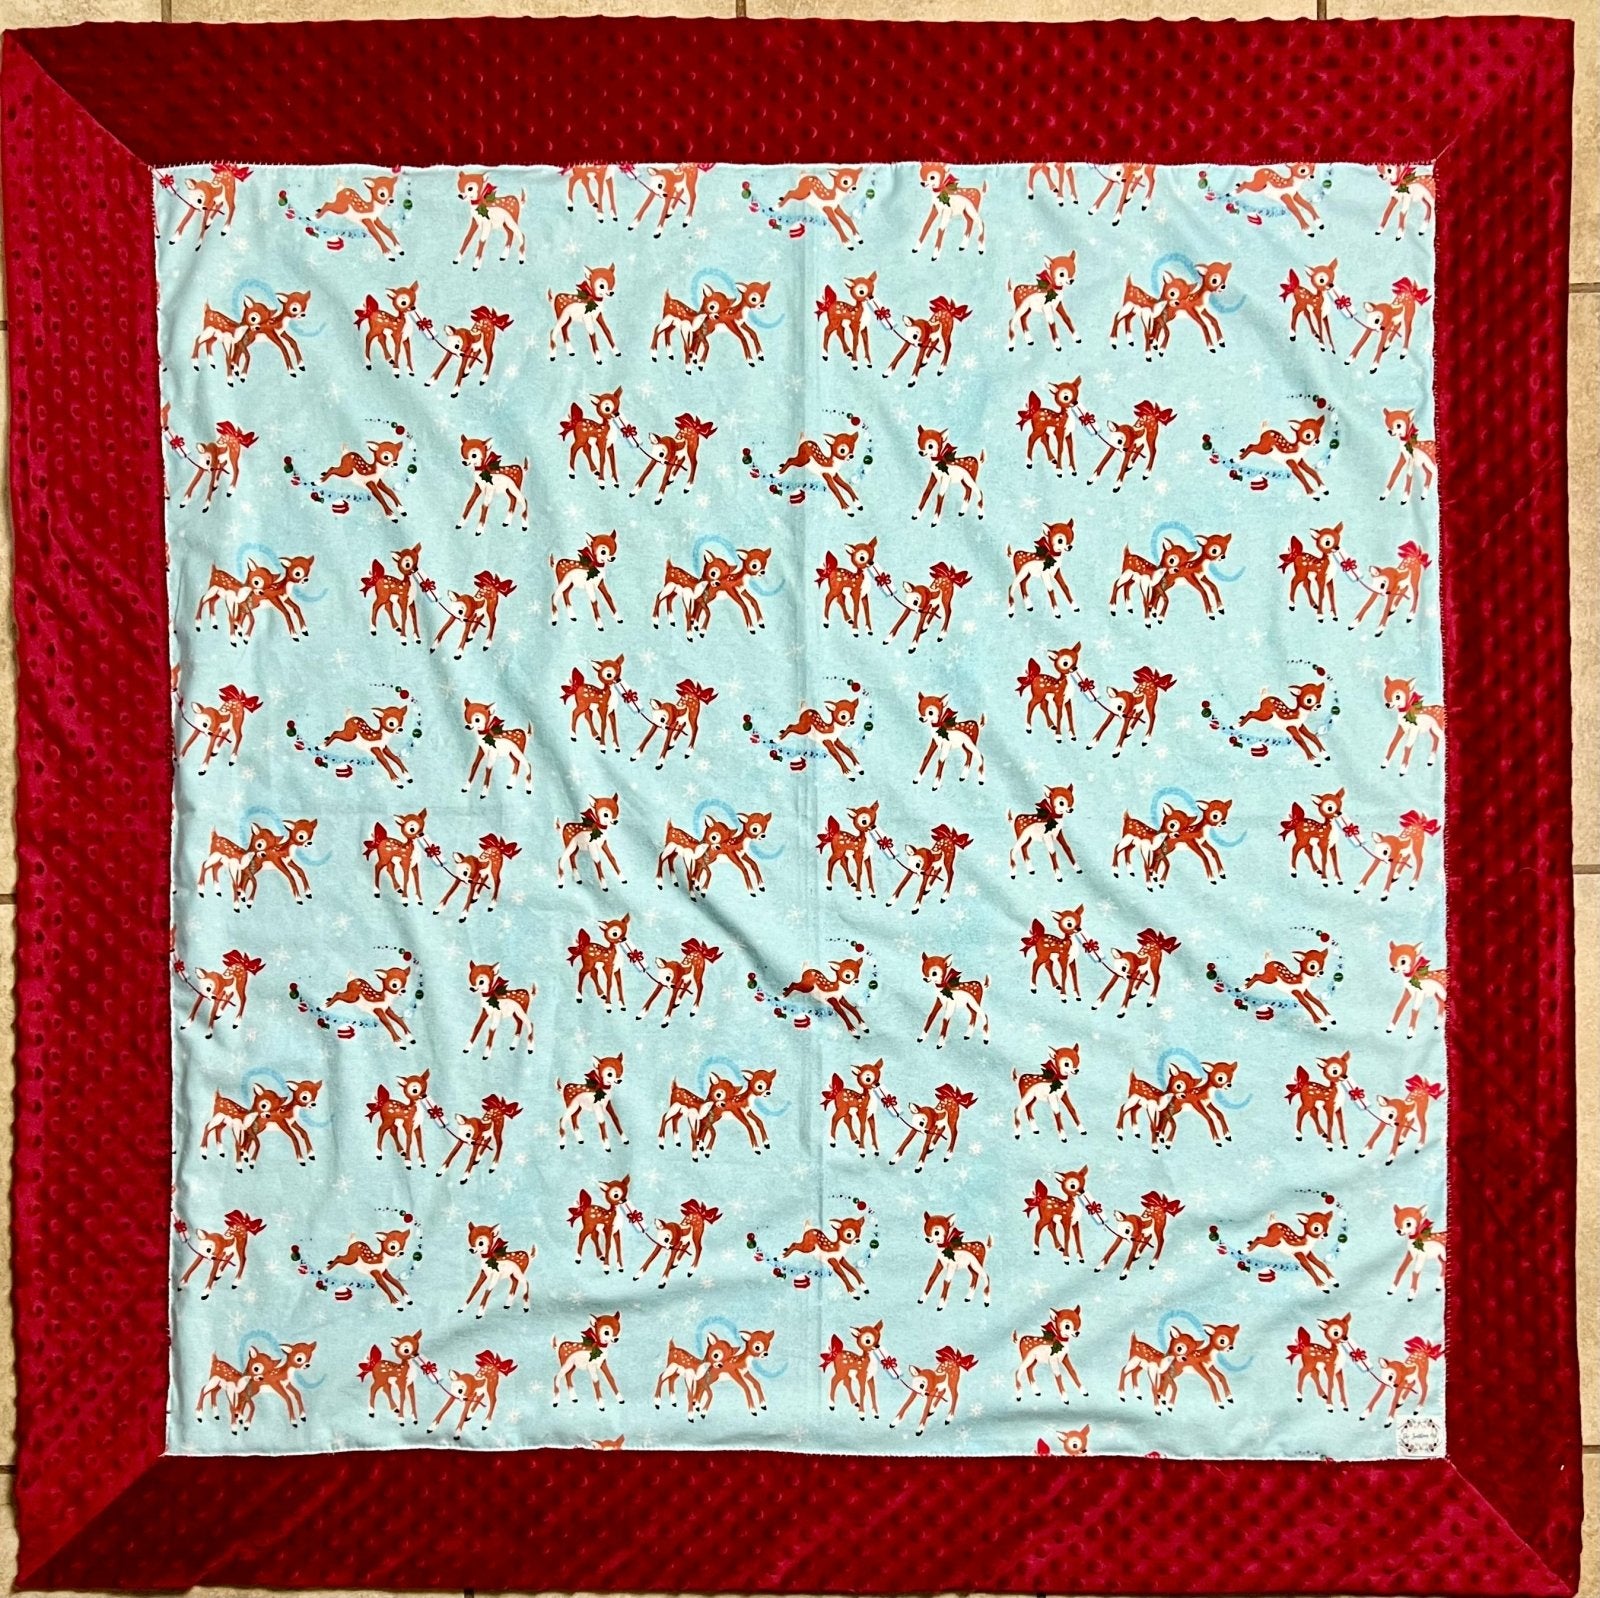 Mini-Throw Quilt- Playful Reindeer Babies - The Southern Nest